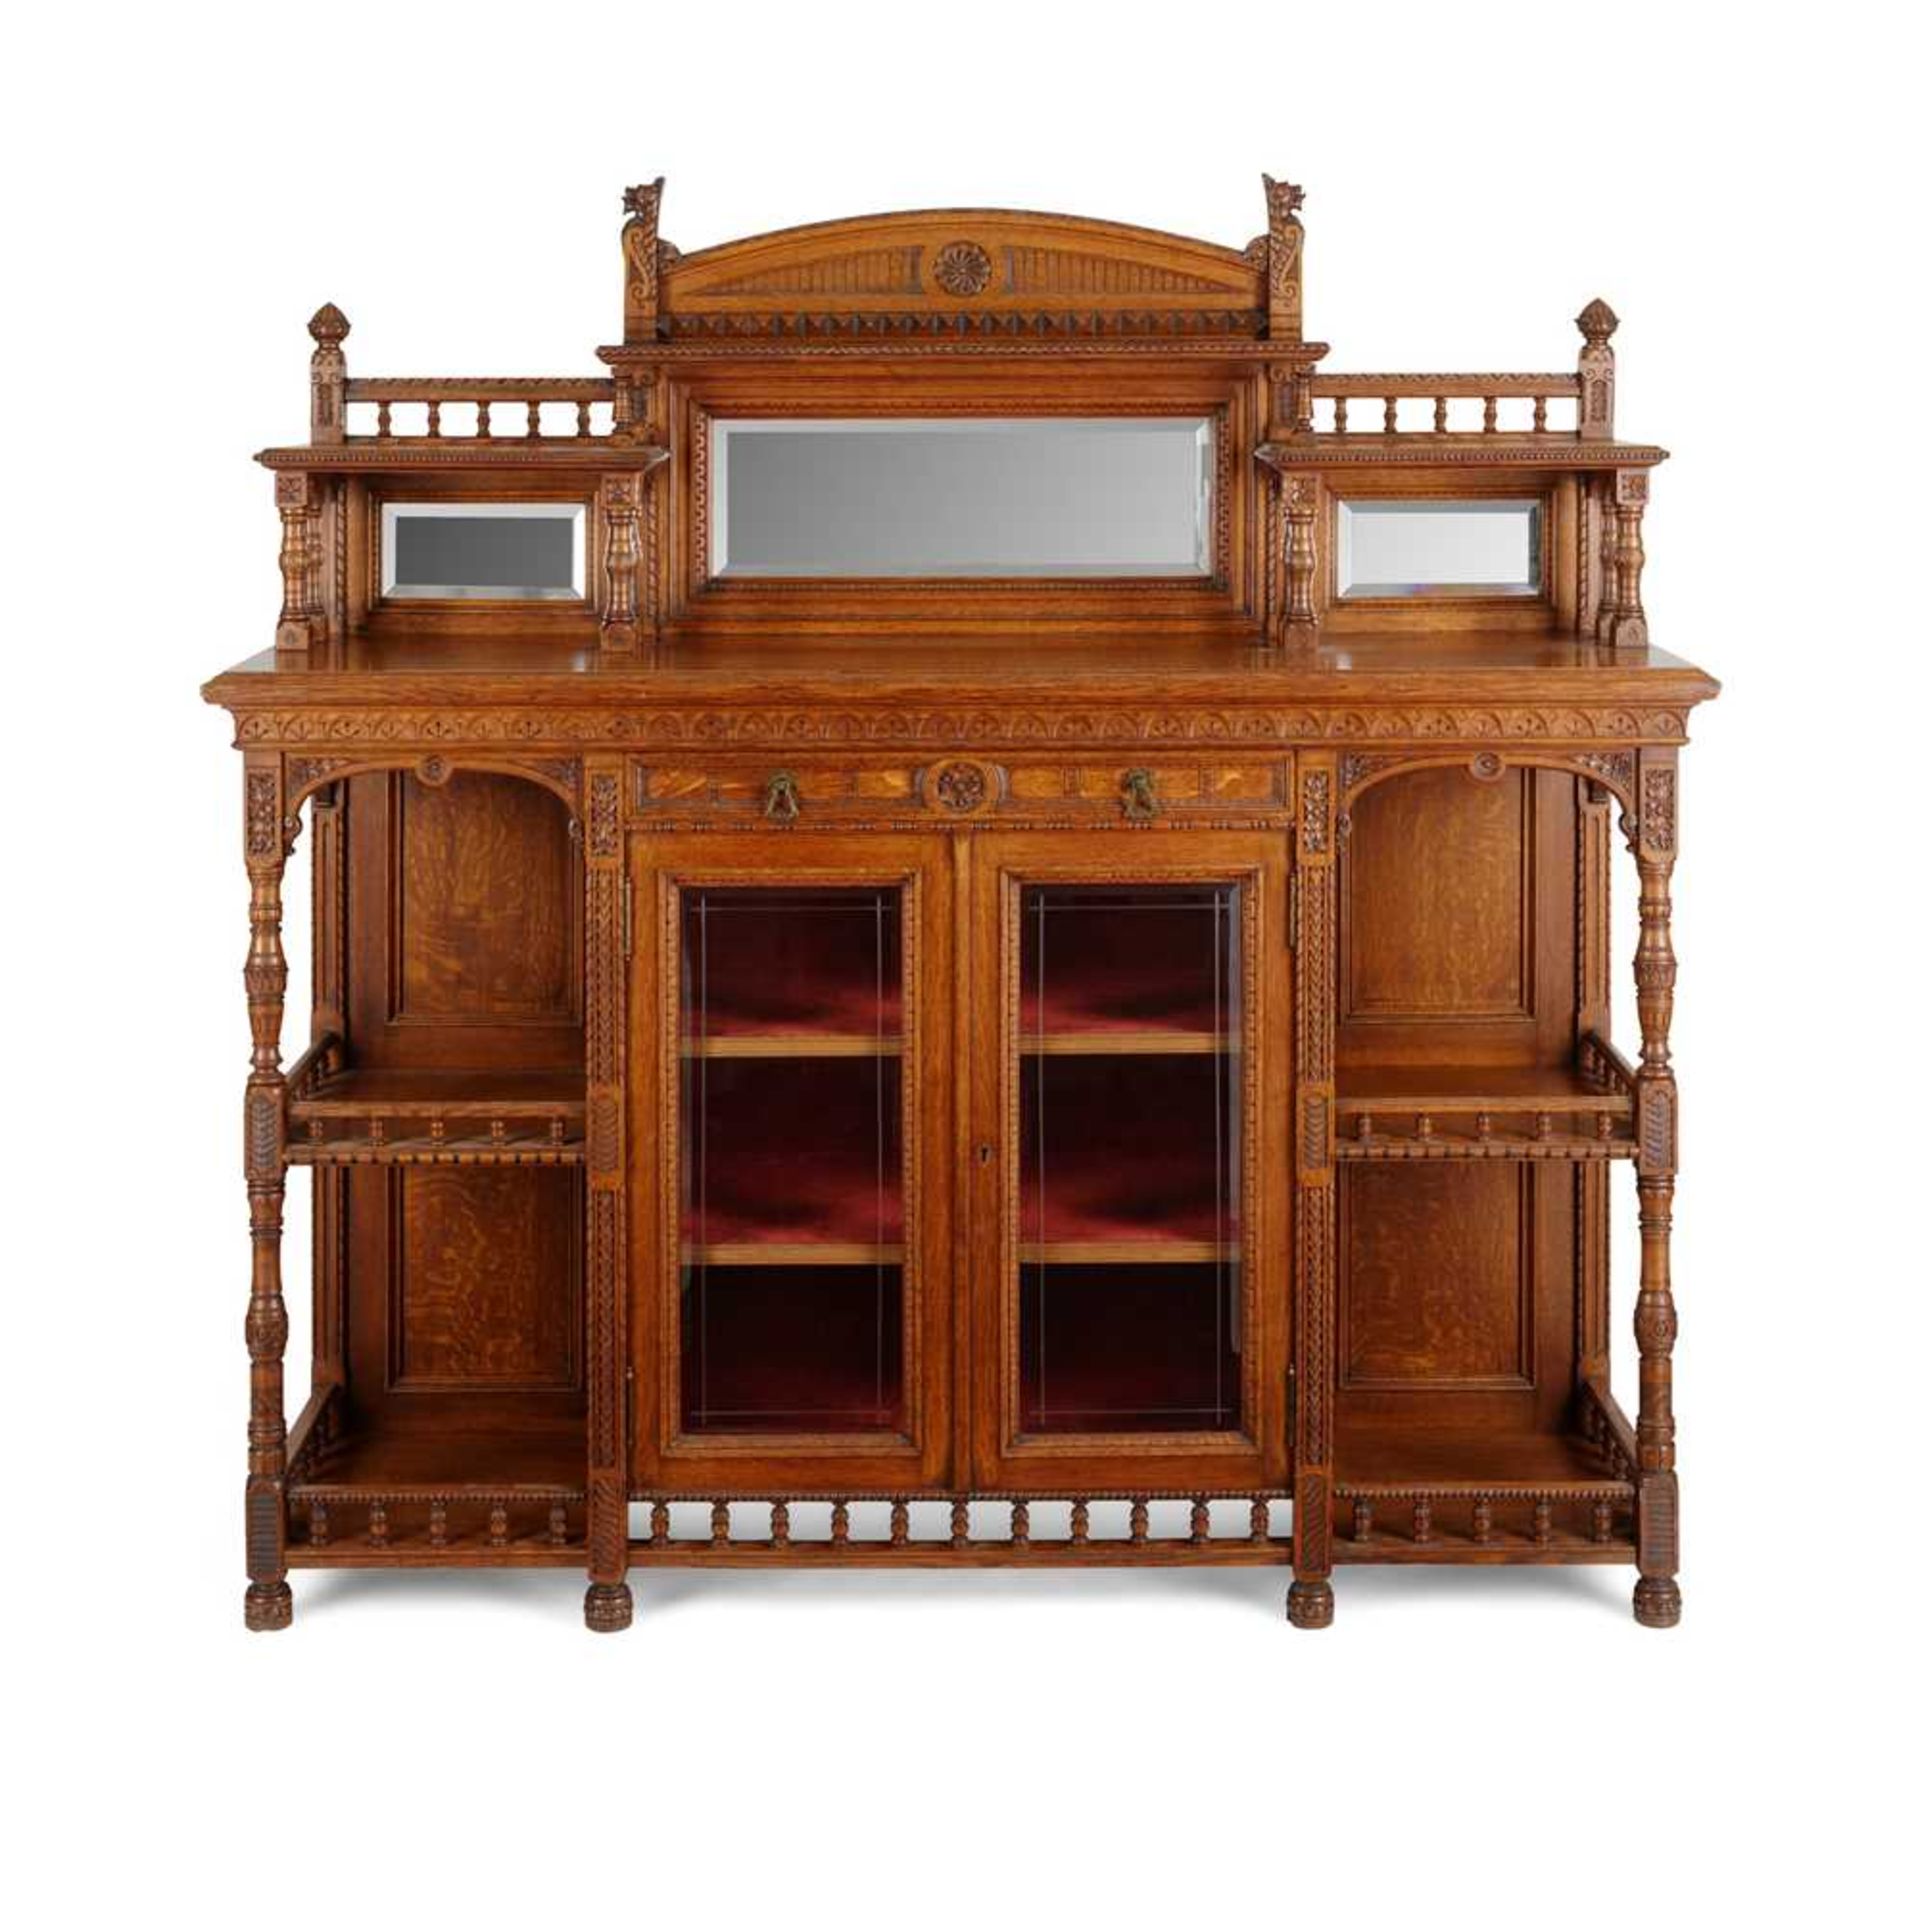 BRUCE TALBERT (1838-1881) (ATTRIBUTED DESIGNER) GOTHIC REVIVAL DRAWING ROOM CABINET, CIRCA 1870